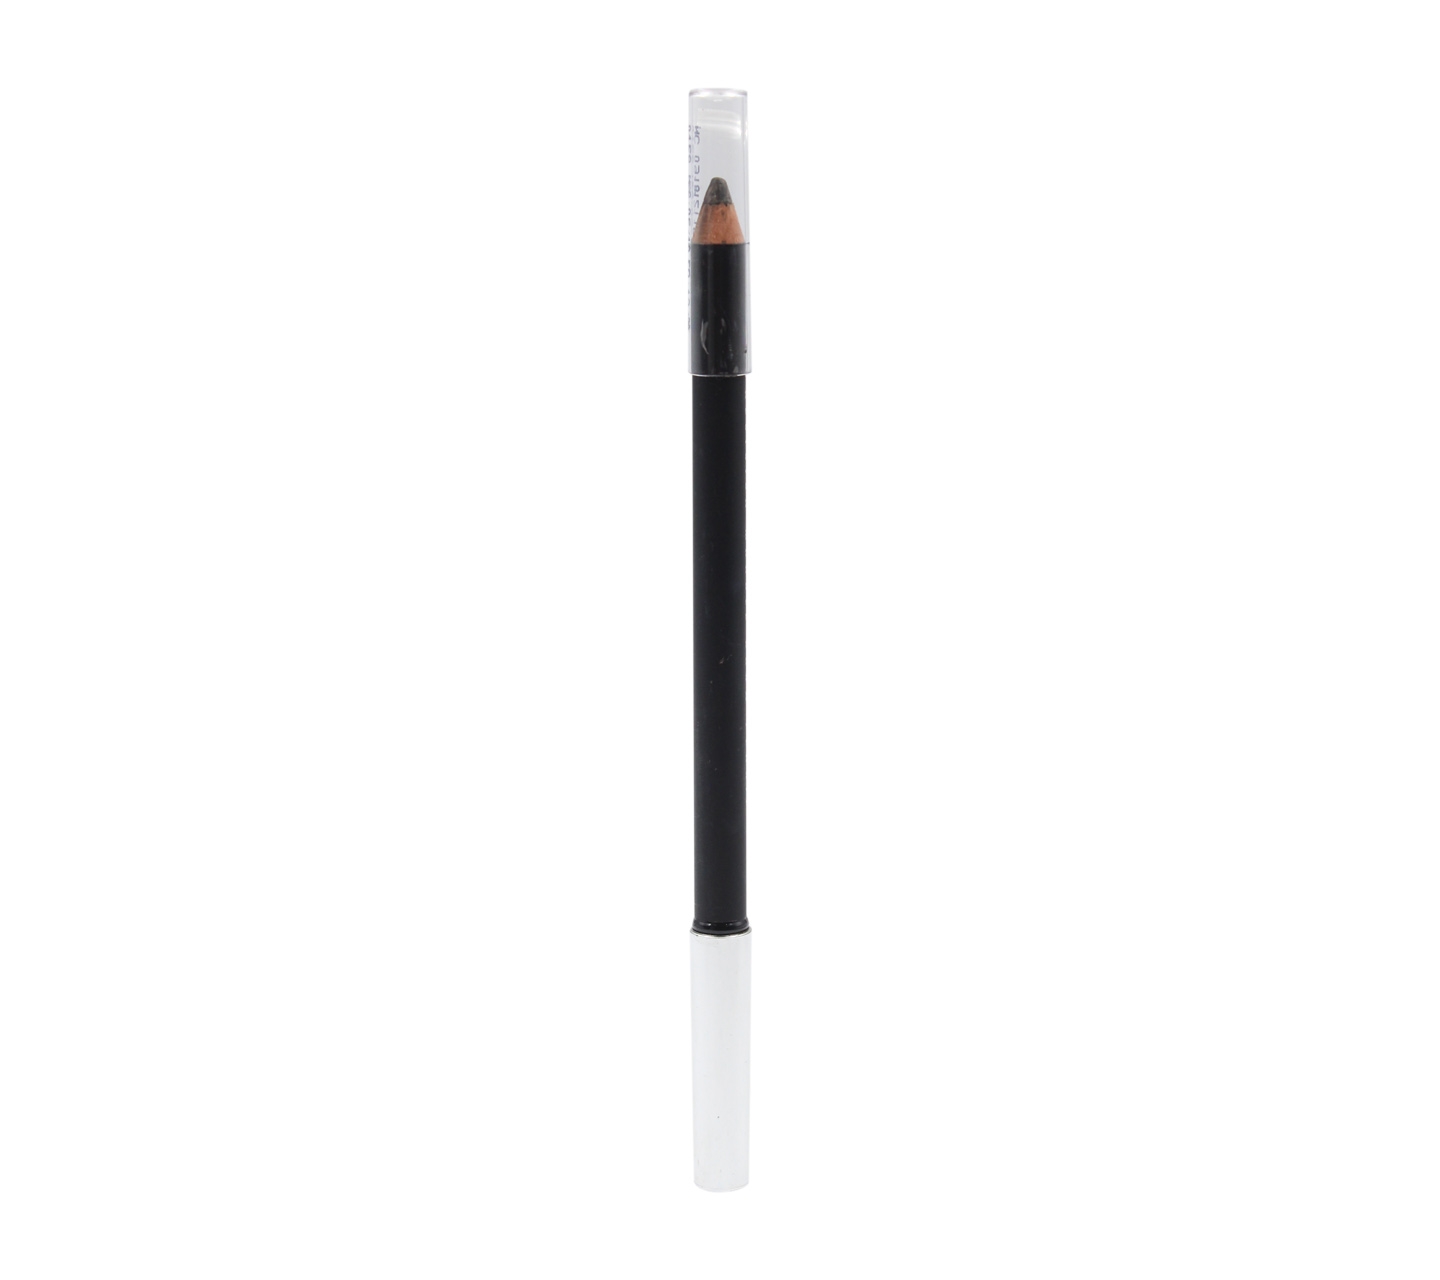 Lakme Absolute Precision Marble Brow Pencil Eyes